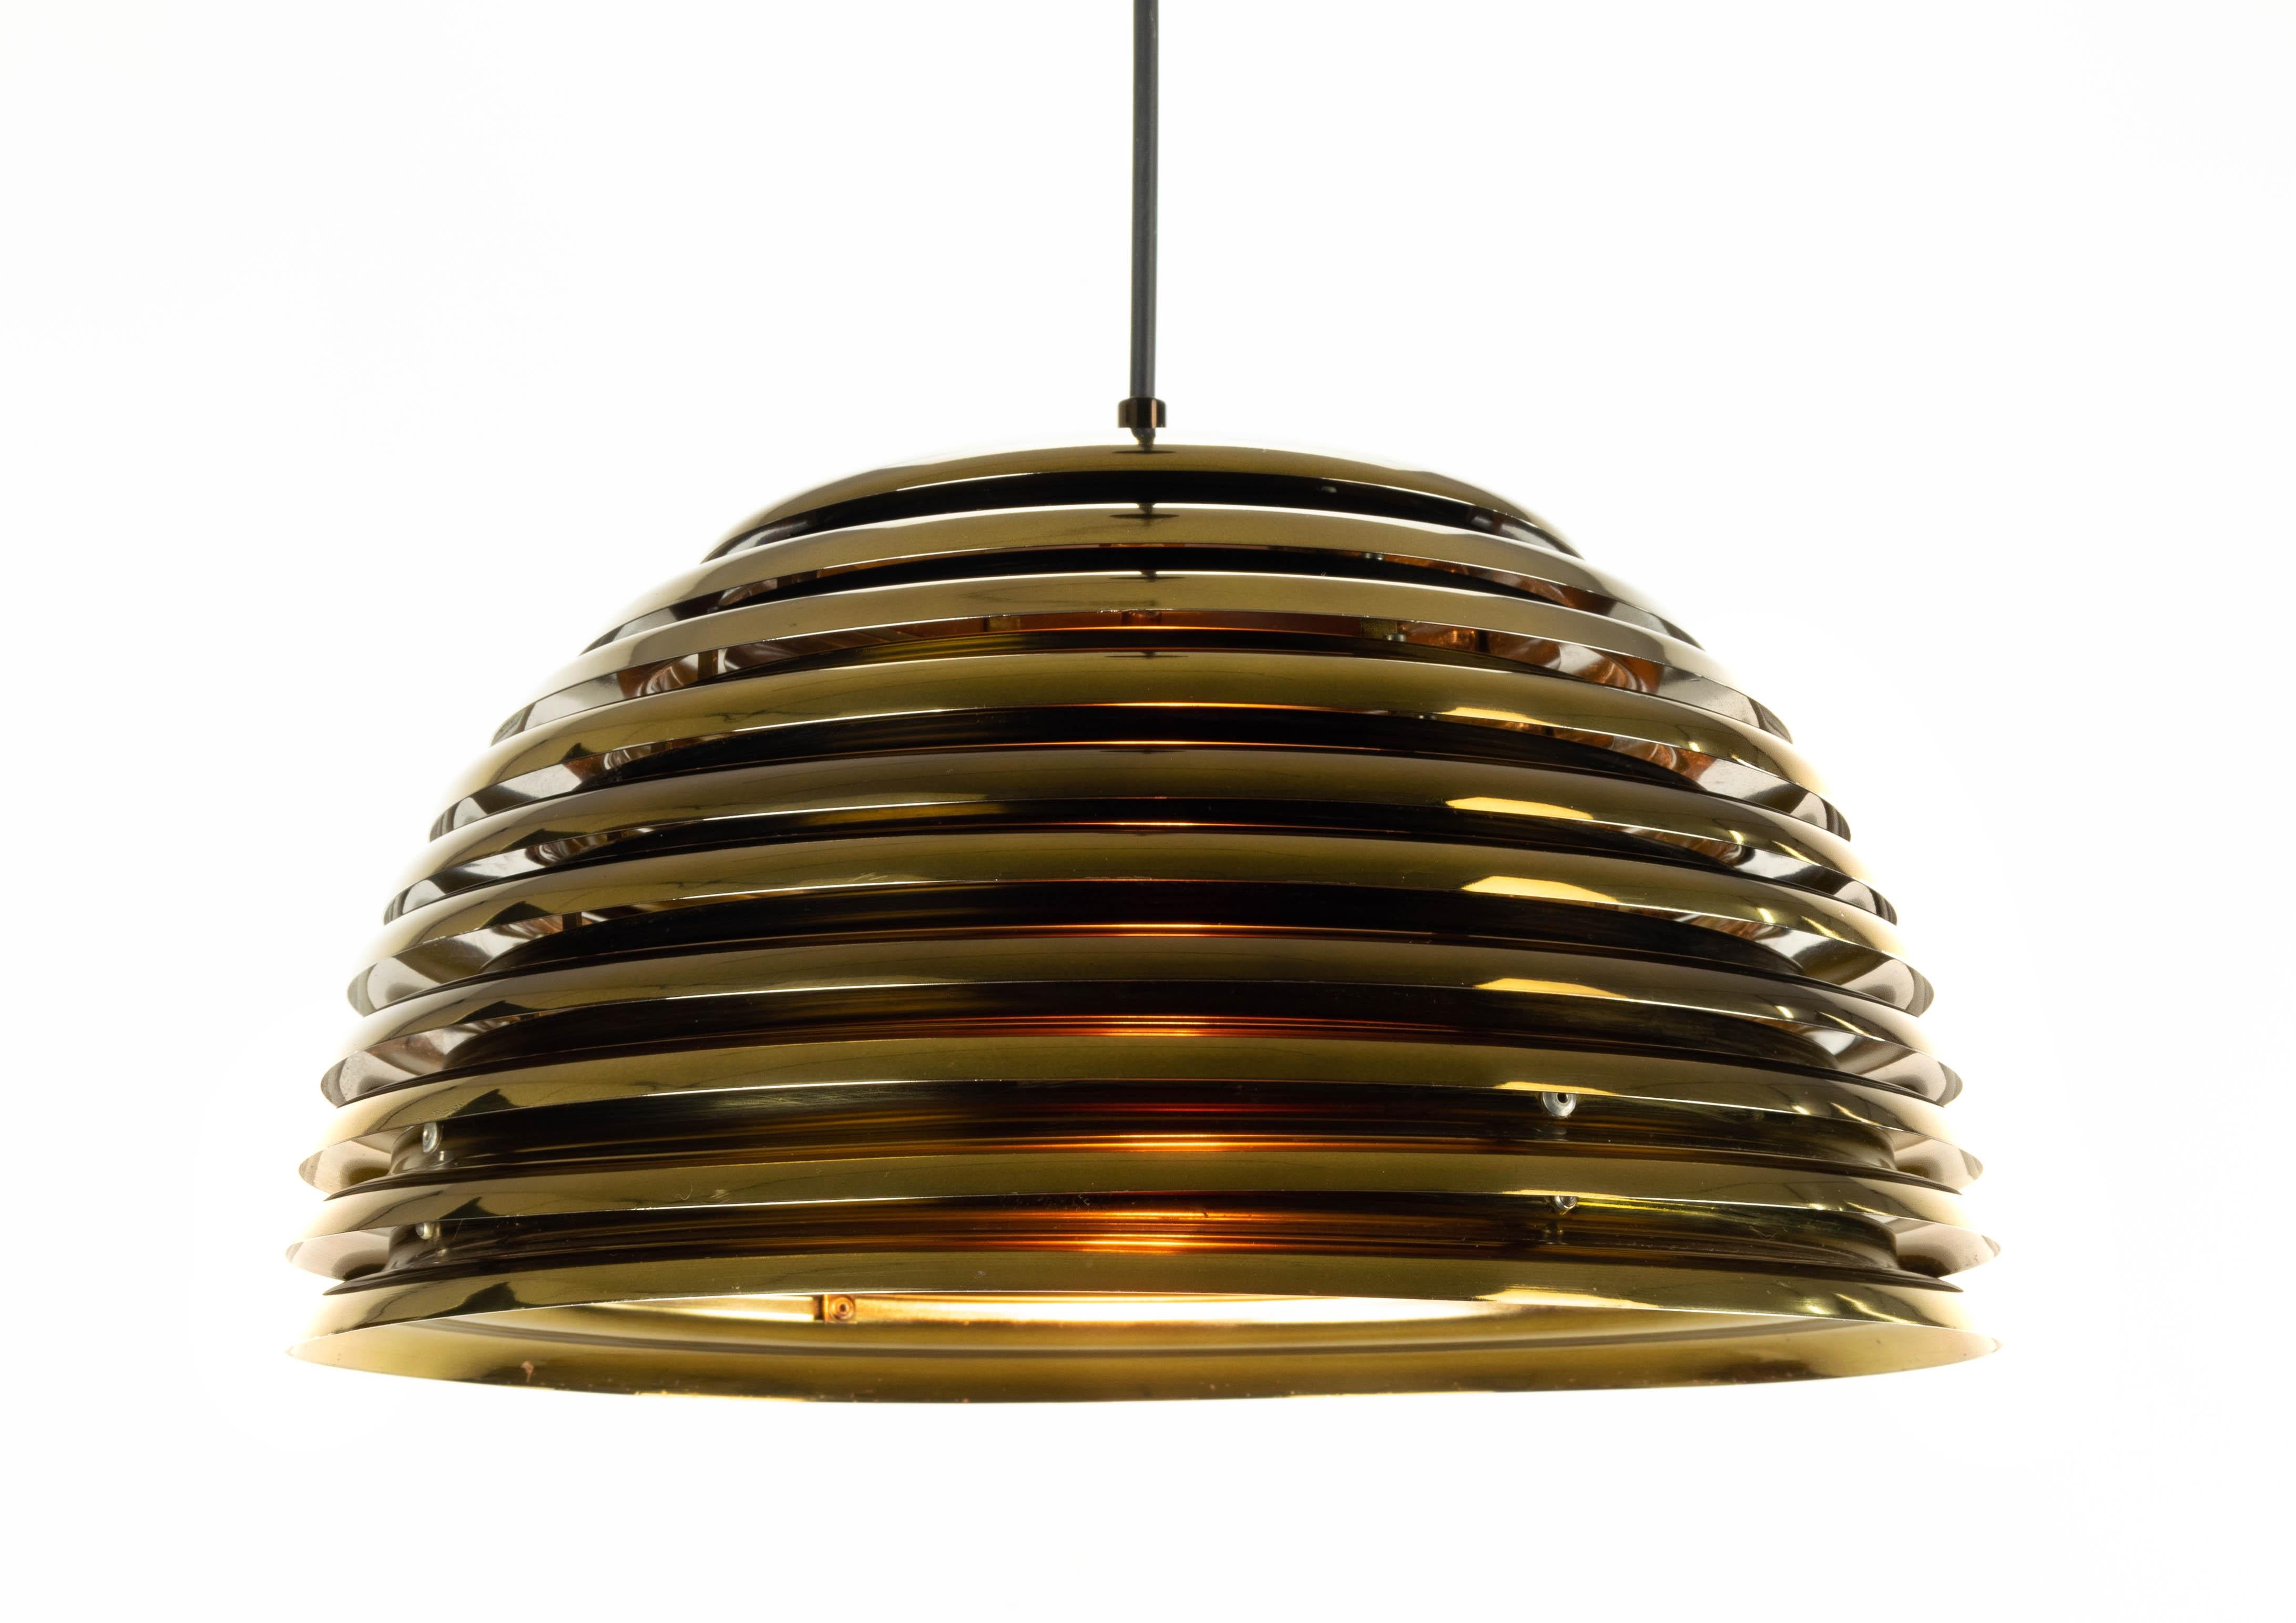 Late 20th Century Kazuo Motozawa Space Age Golden Steel Saturno Chandelier for Staff, Germany 1972